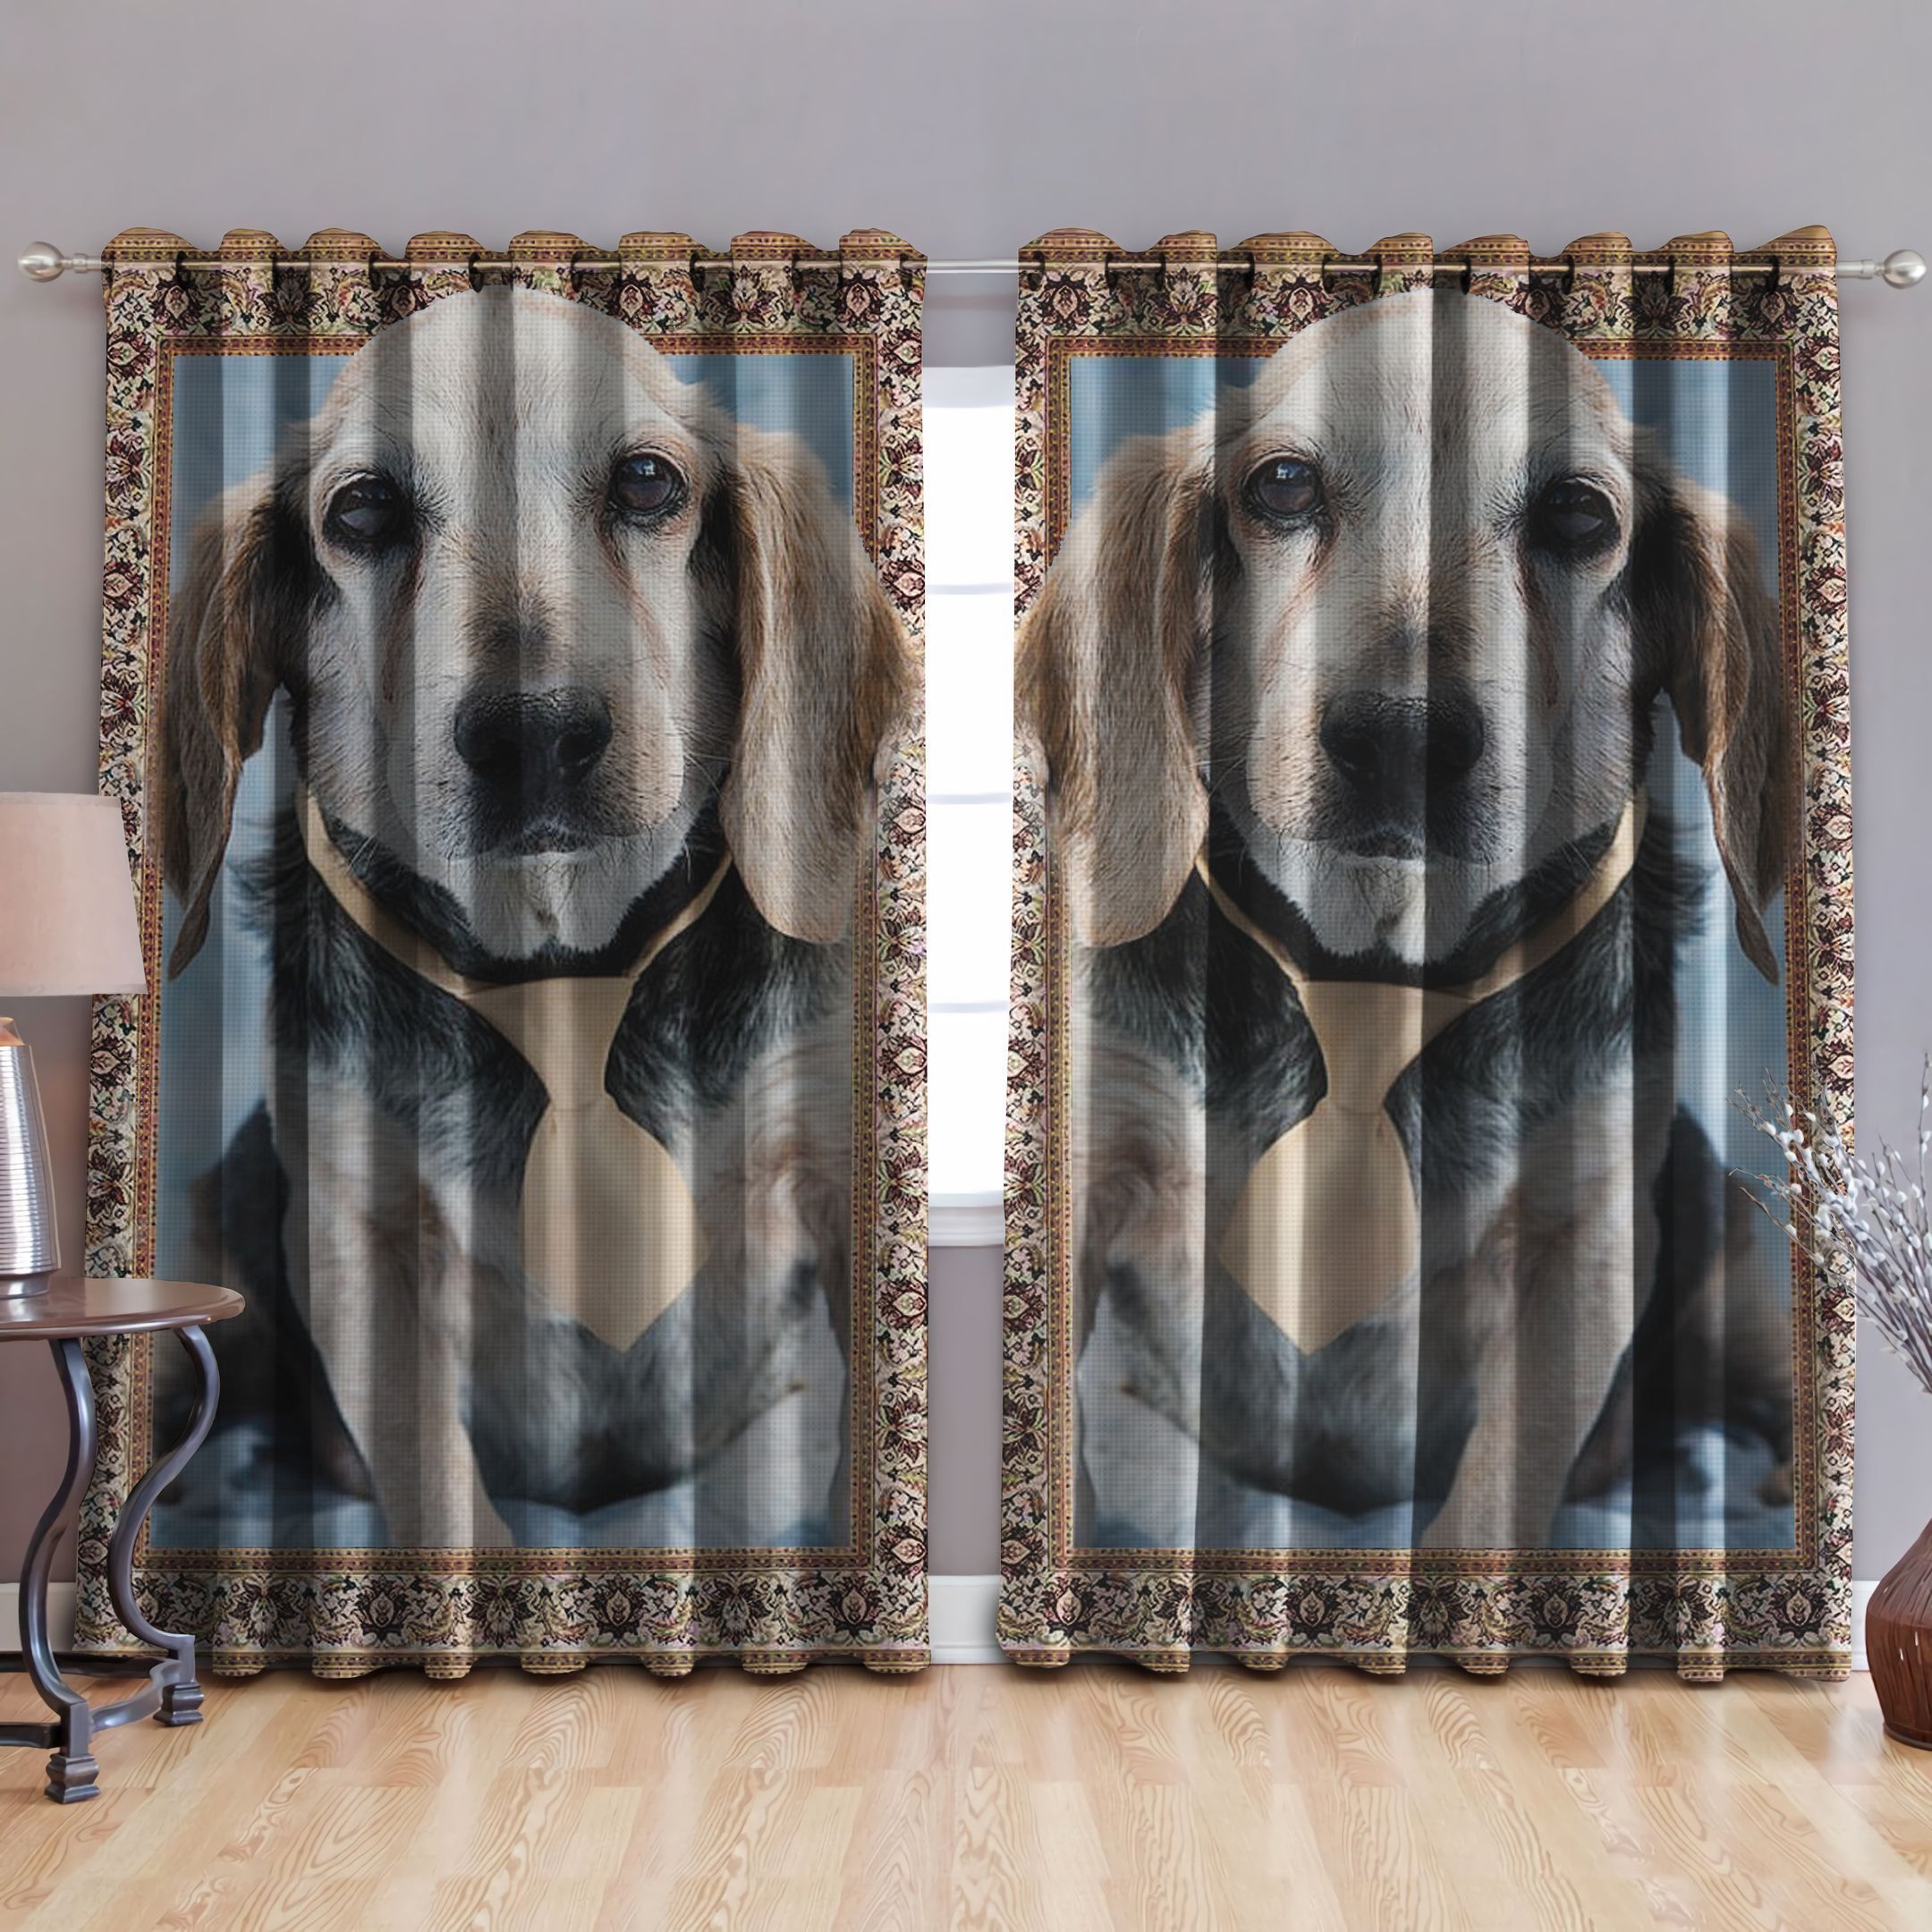 Lovely Beaglewith Beautiful Patten Printed Window Curtains Home Decor